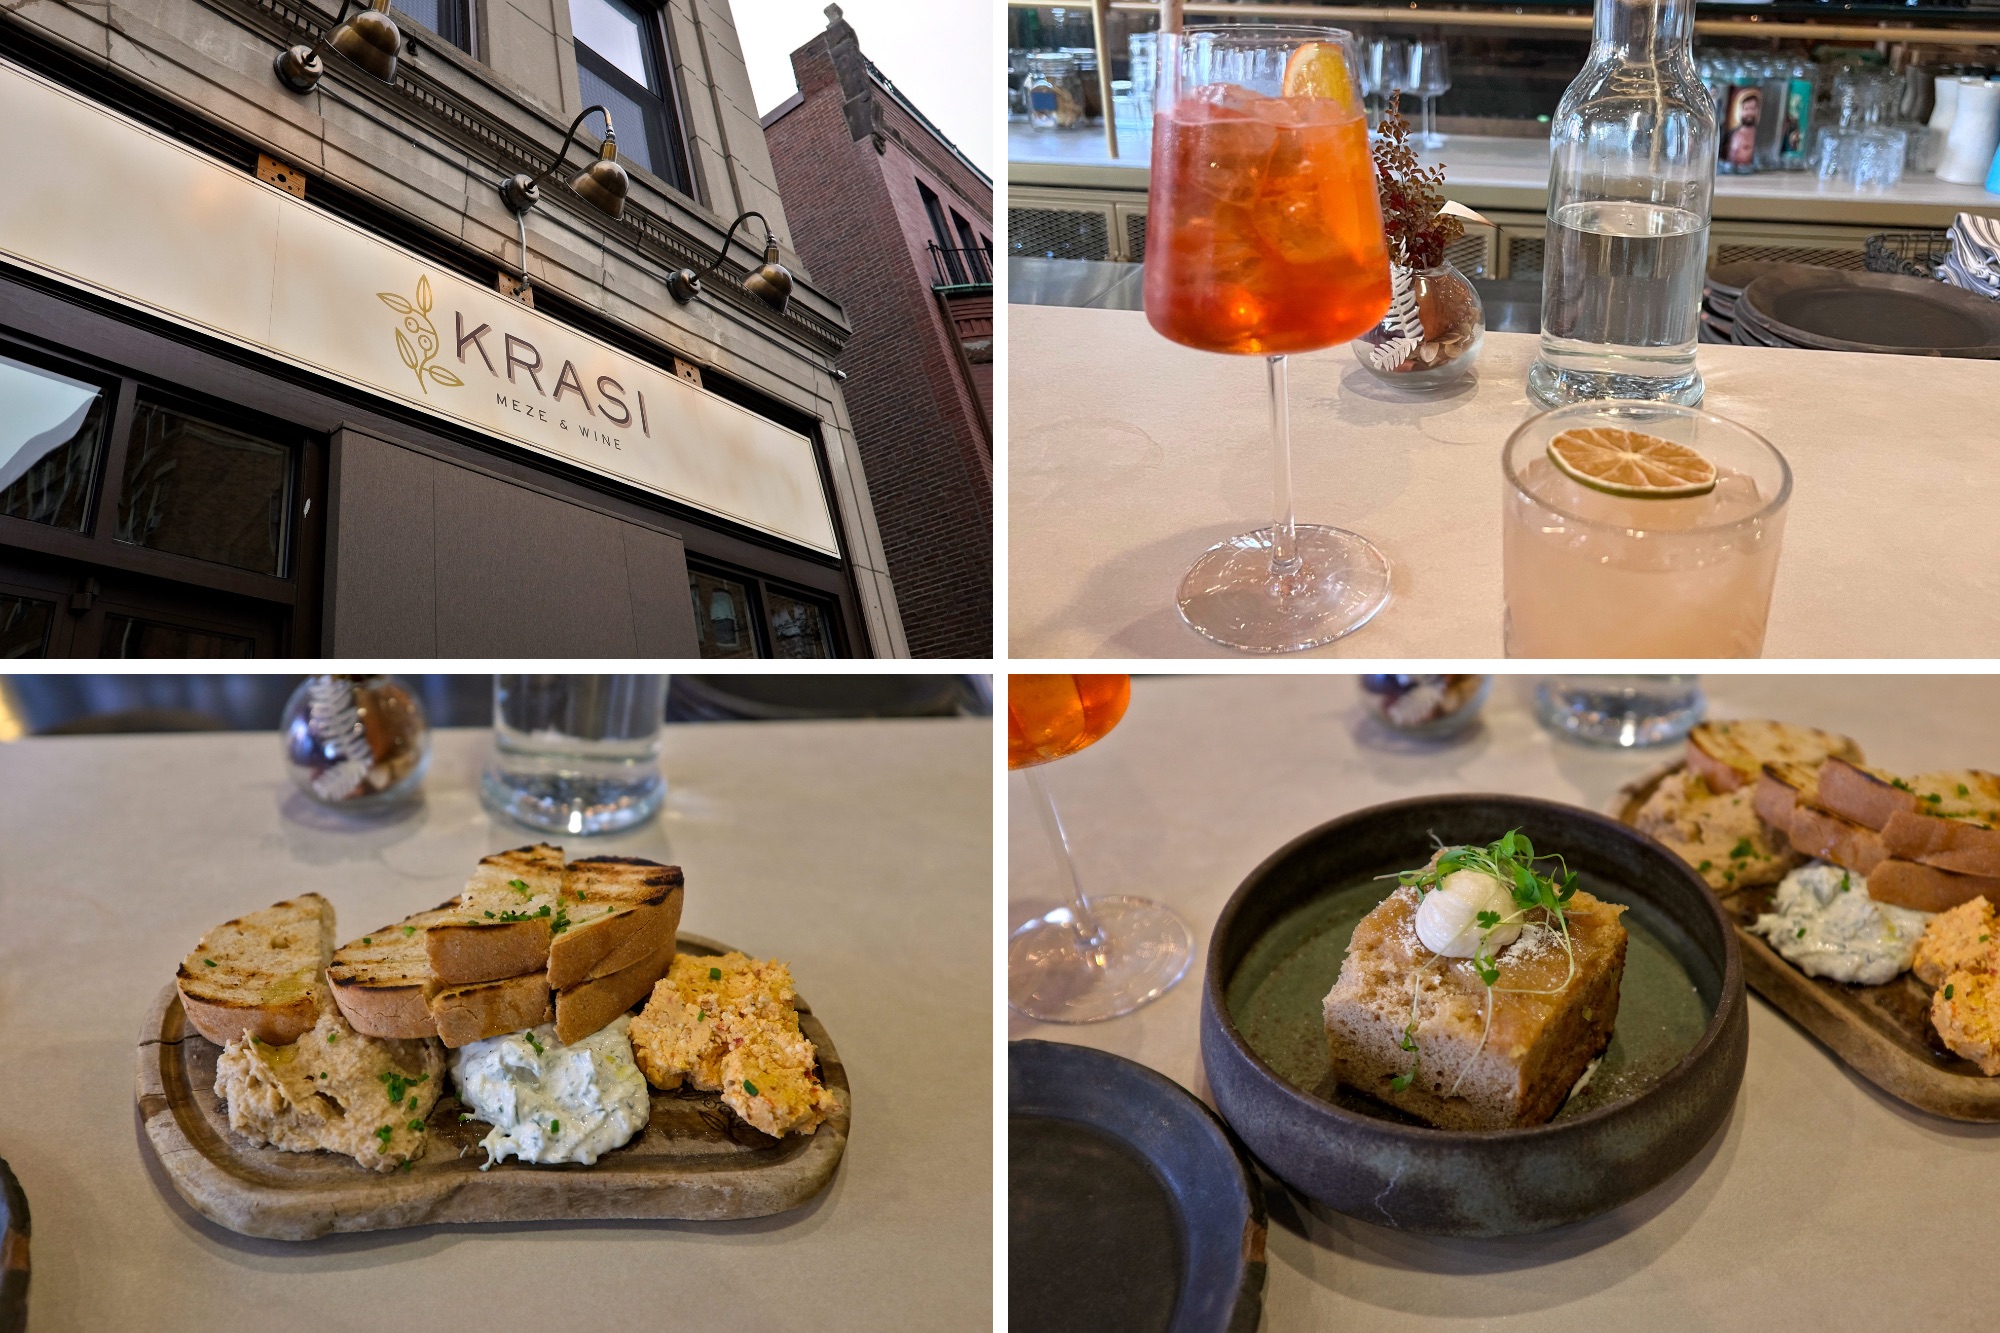 Dishes and exterior of Boston's Krasi